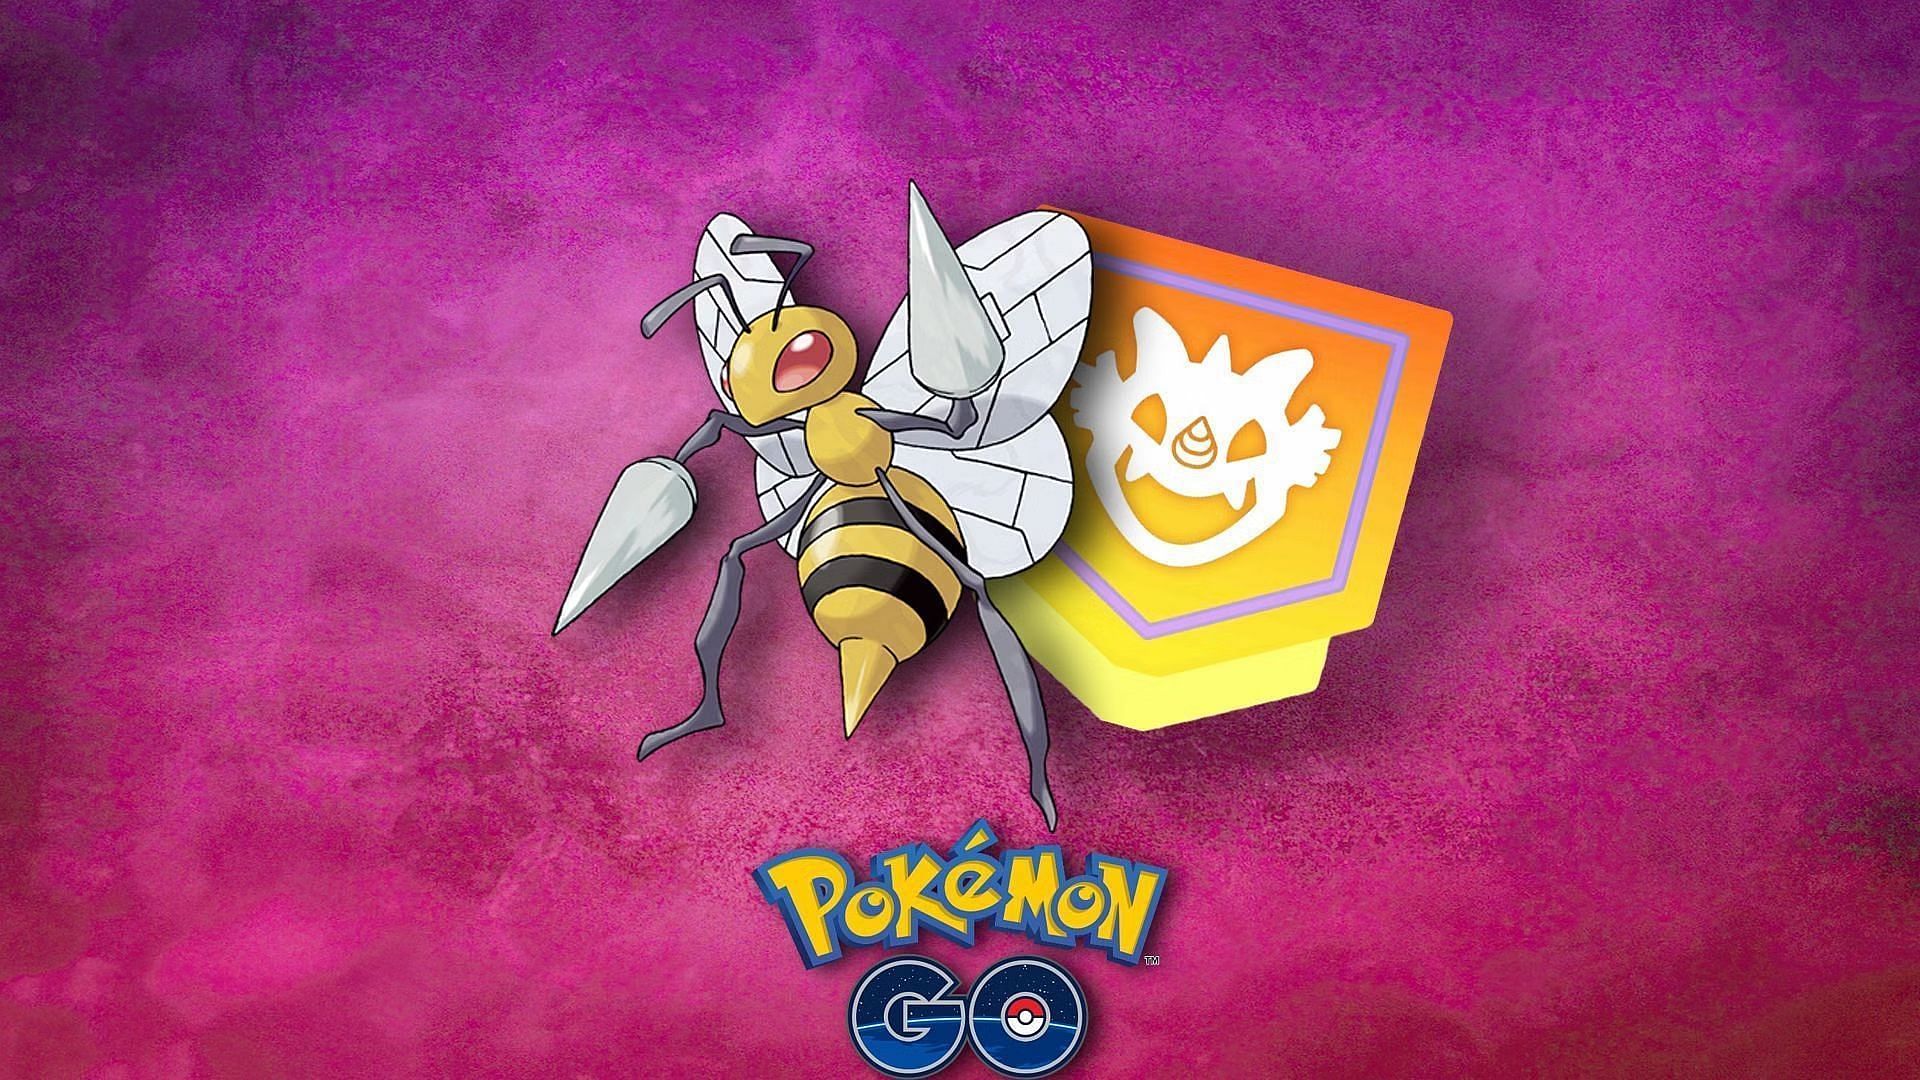 Pokemon GO Beedrill moveset, counters, and performance